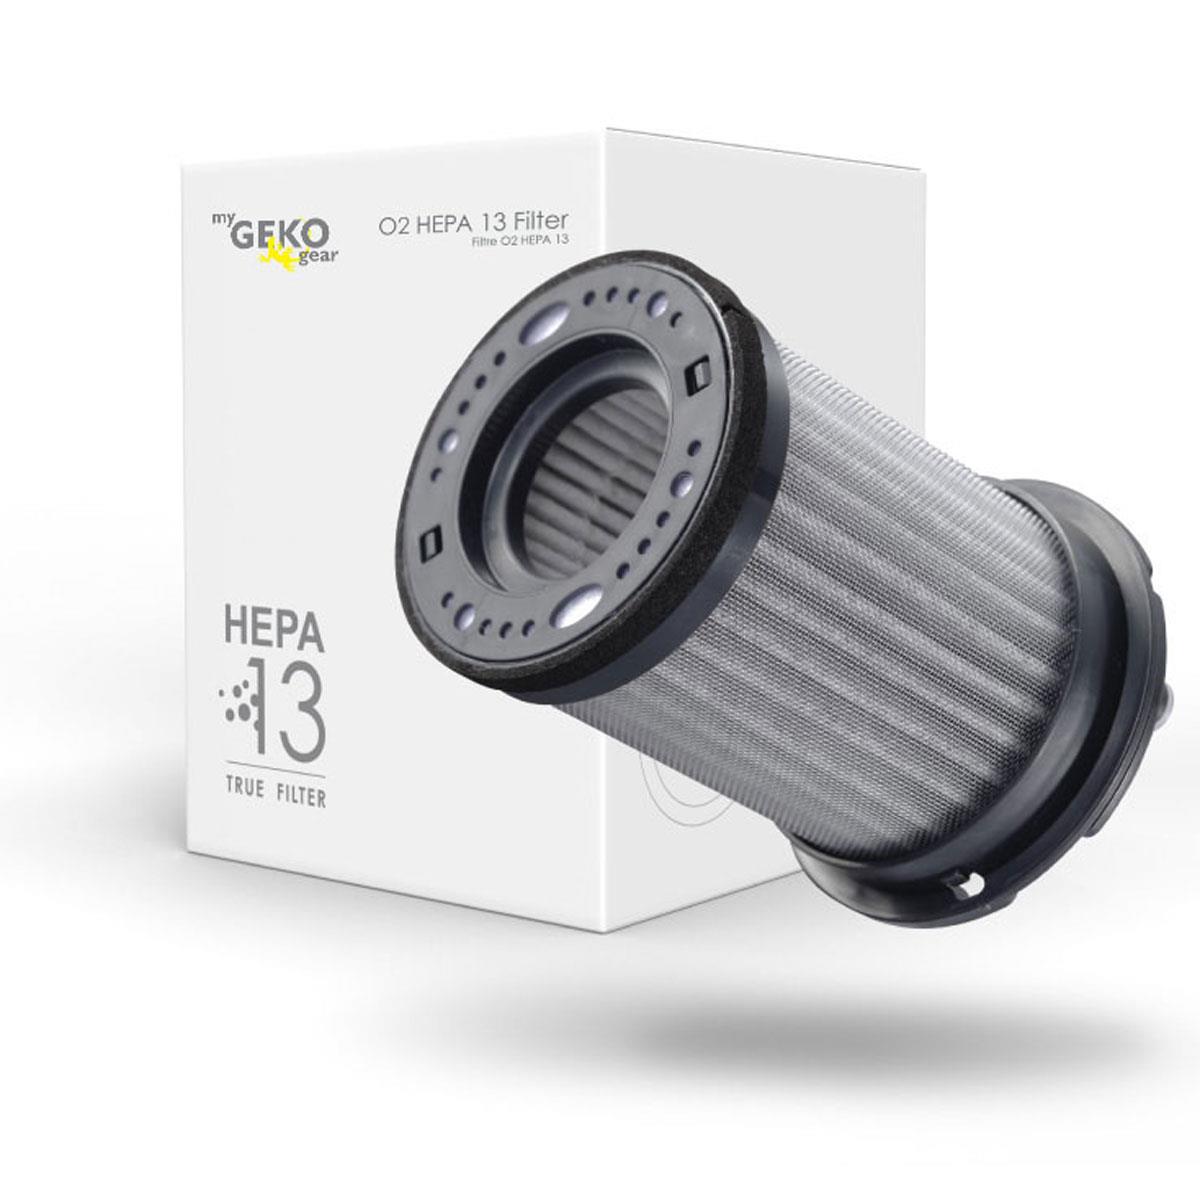 Image of myGEKOgear HEPA 13 Activated Carbon Filter for Cyclone O2 Air Purfier